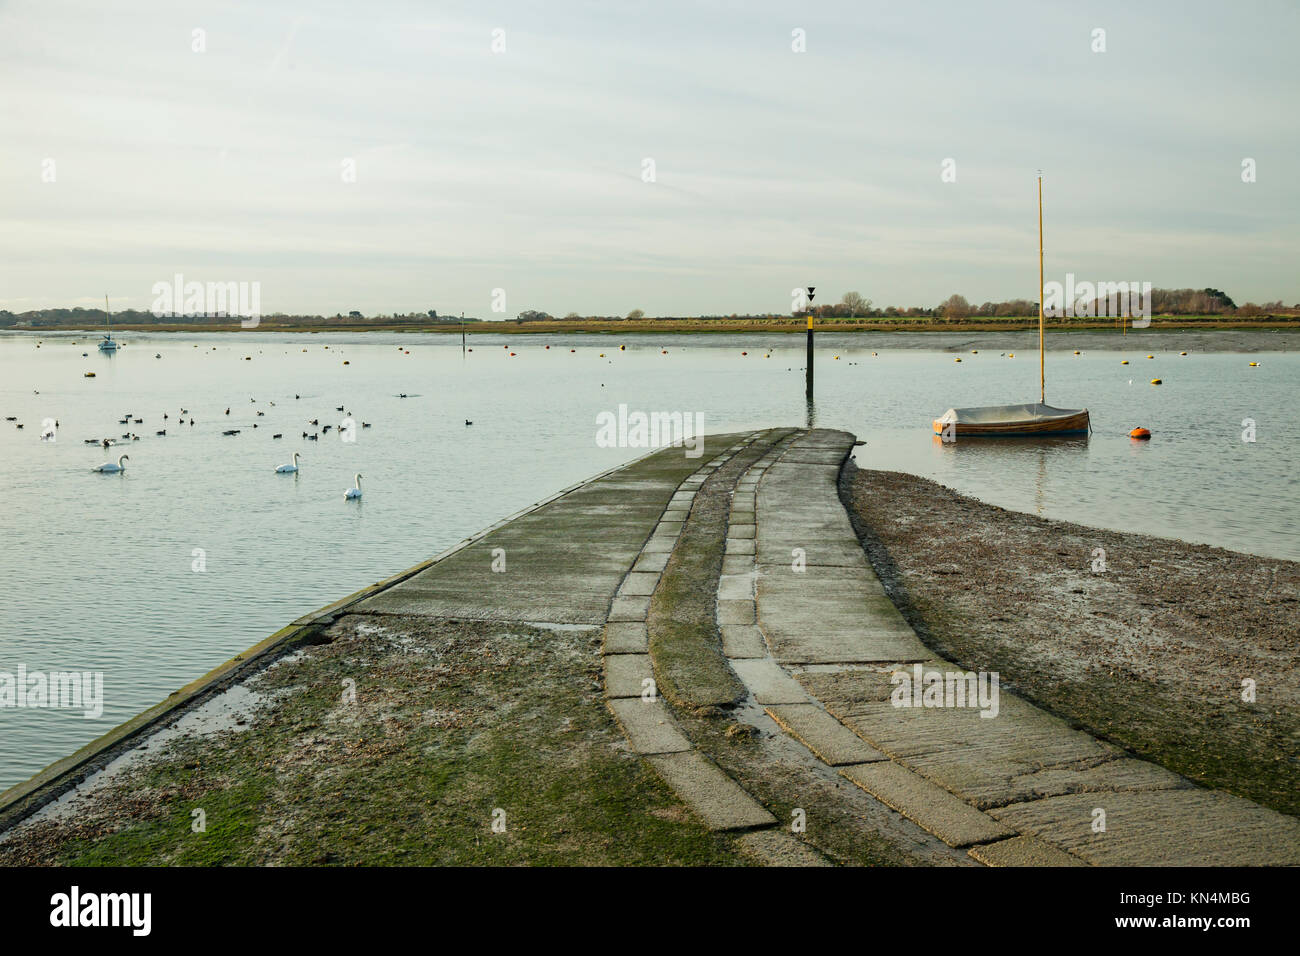 Winter day at Bosham Harbour, part of Chichester Harbour, West Sussex, England. Stock Photo